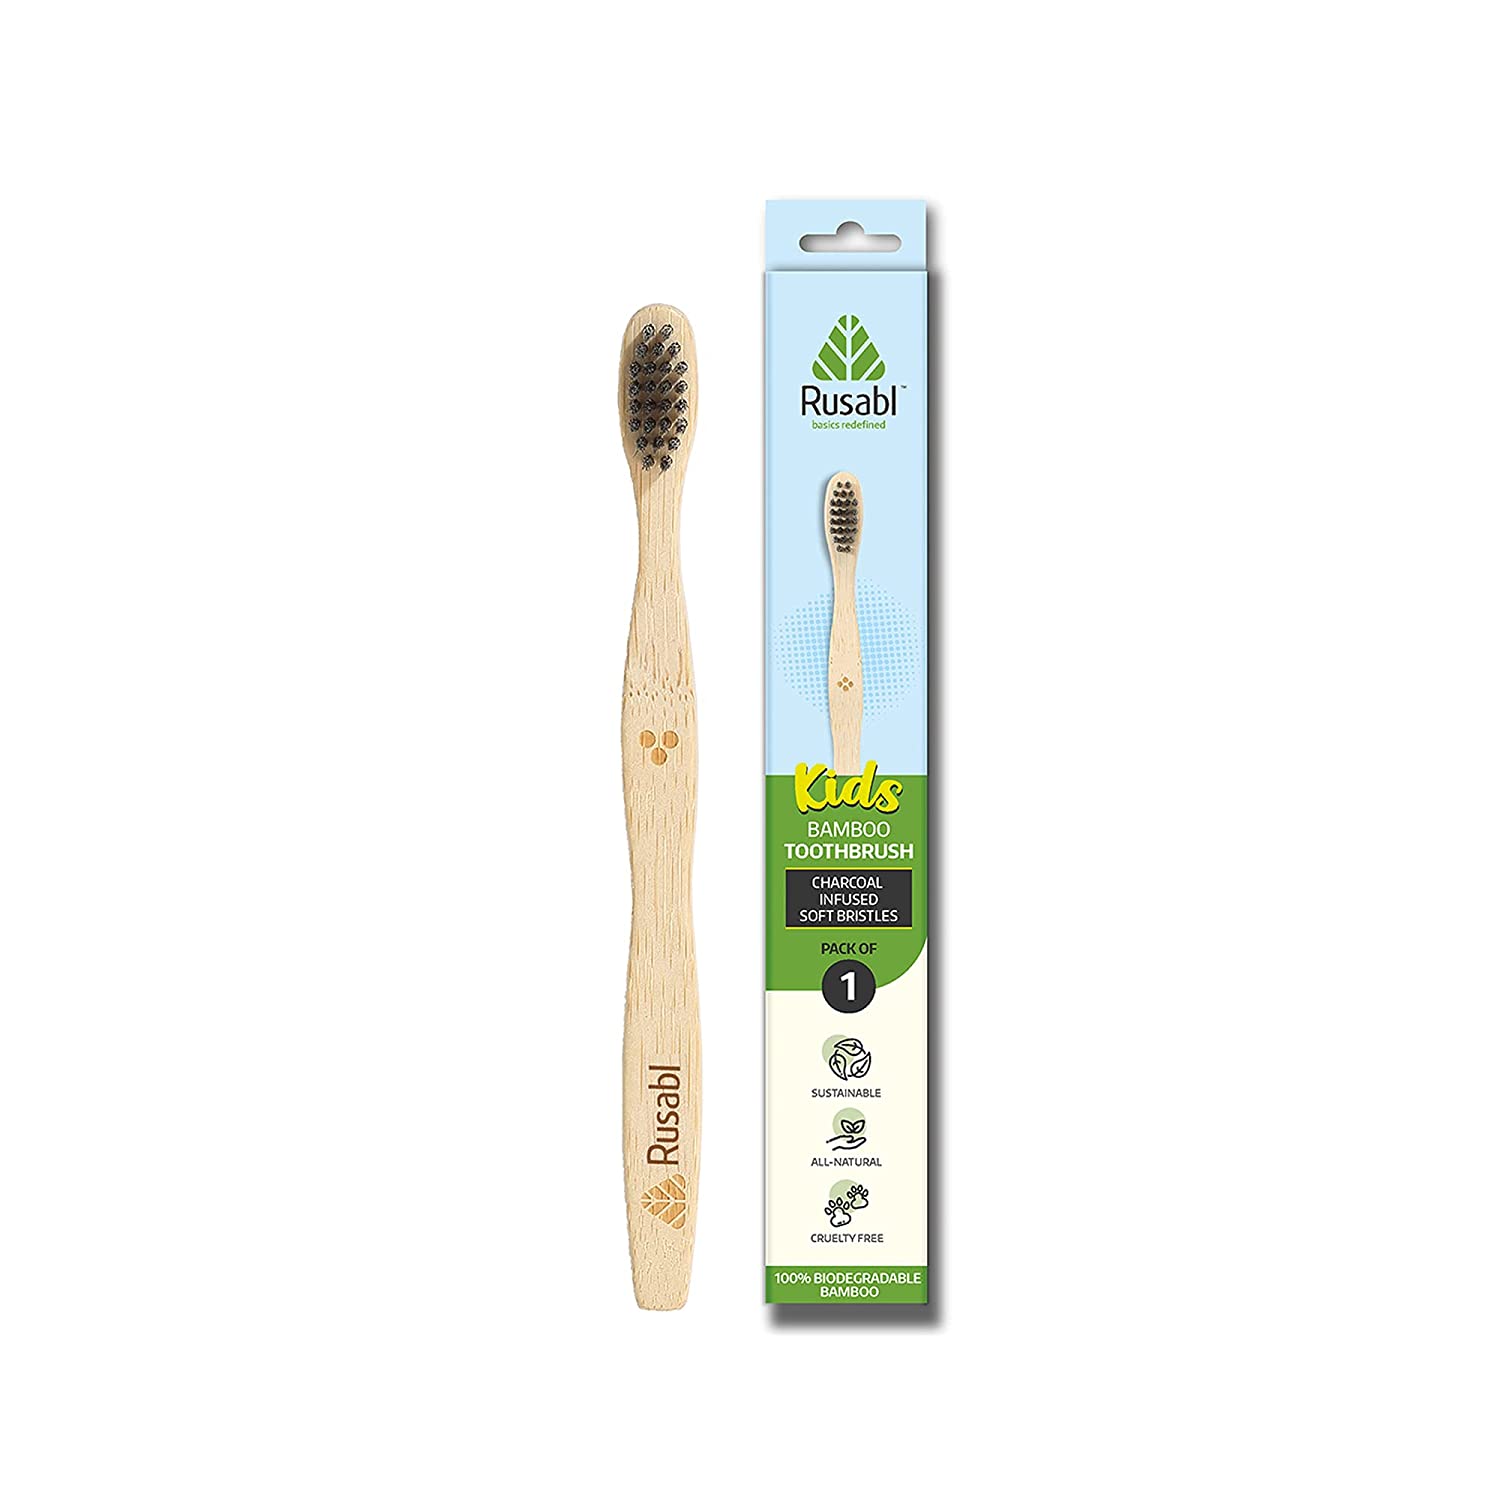 Rusabl Organic Bamboo Toothbrush for Kids, Charcoal Activated Soft Bristles, Biodegradable & Anti-Bacterial, Eco-friendly & Natural